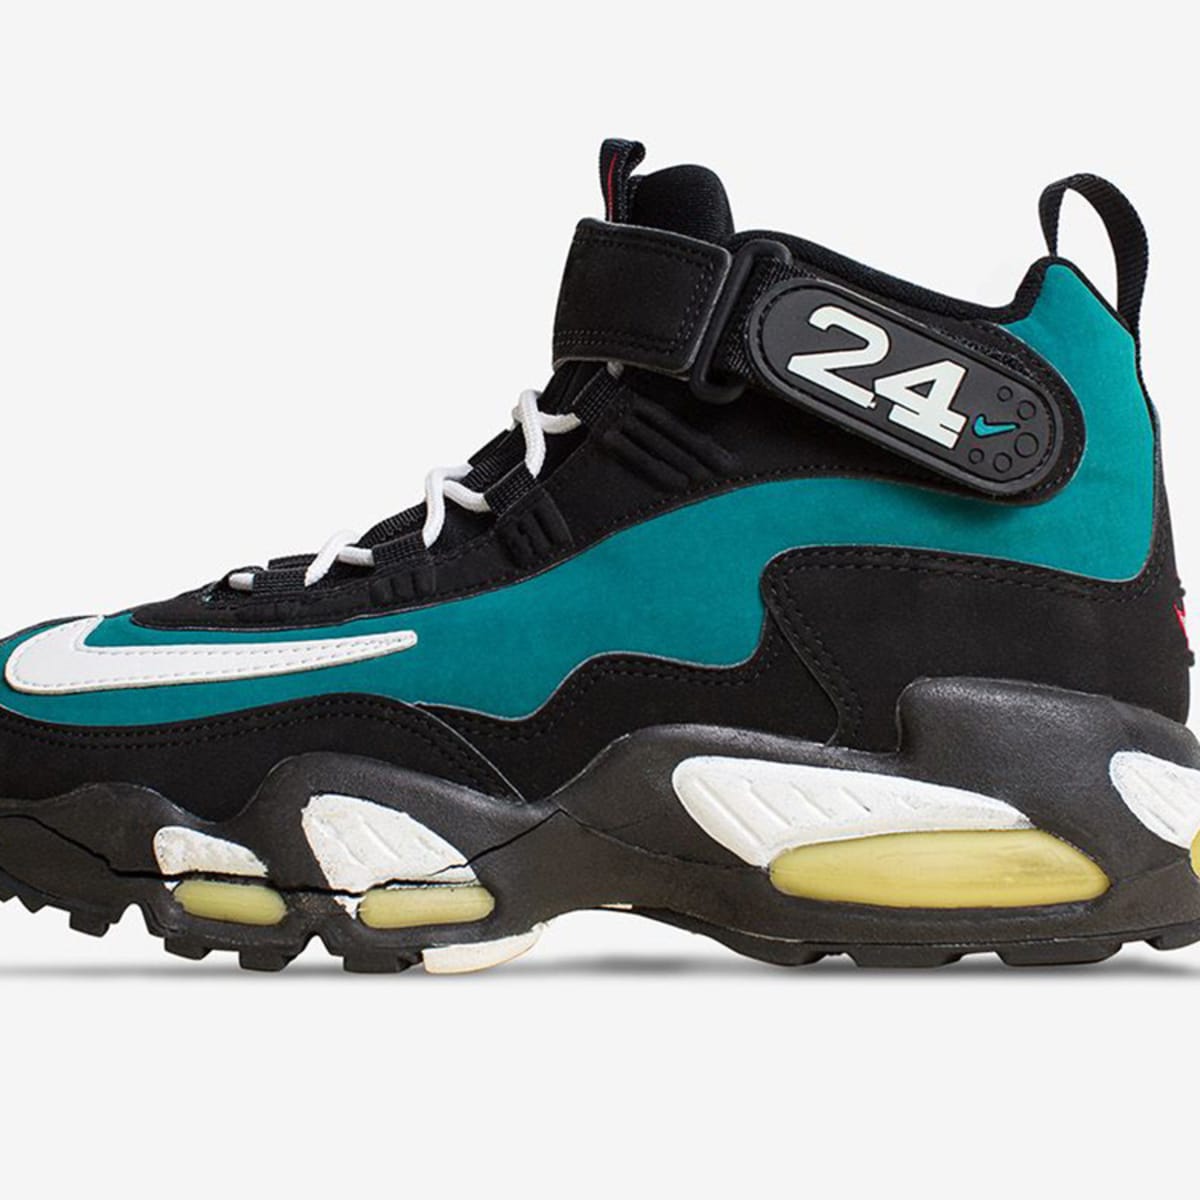 Griffey Jr.'s sneakers inspired a Sports Illustrated